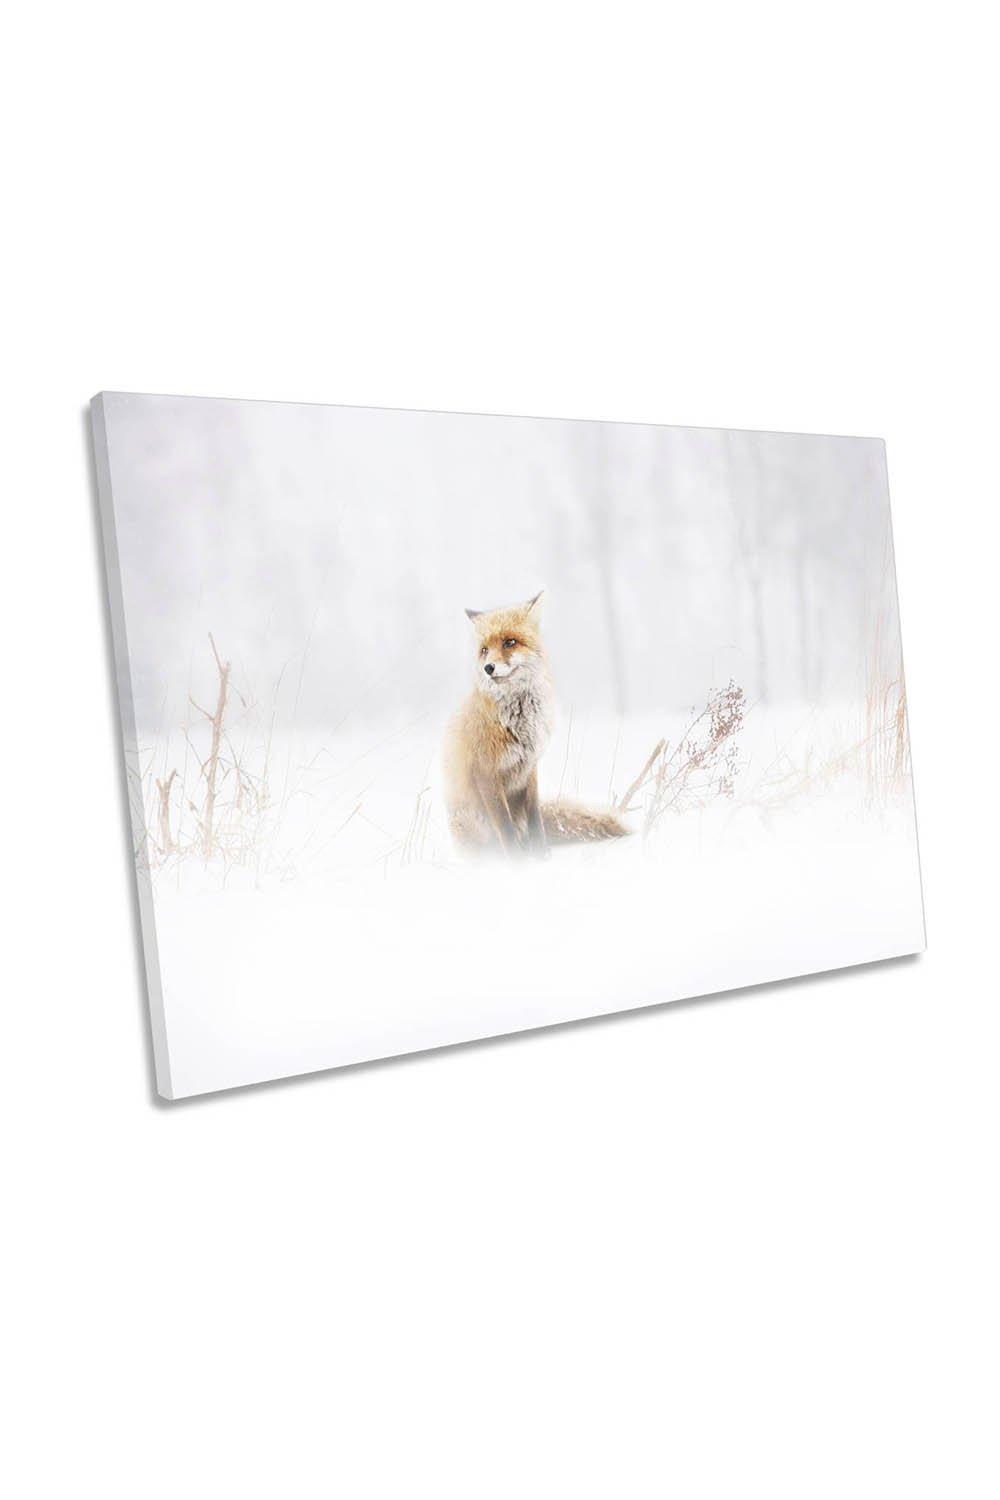 Waiting Fox Winter White Snow Canvas Wall Art Picture Print